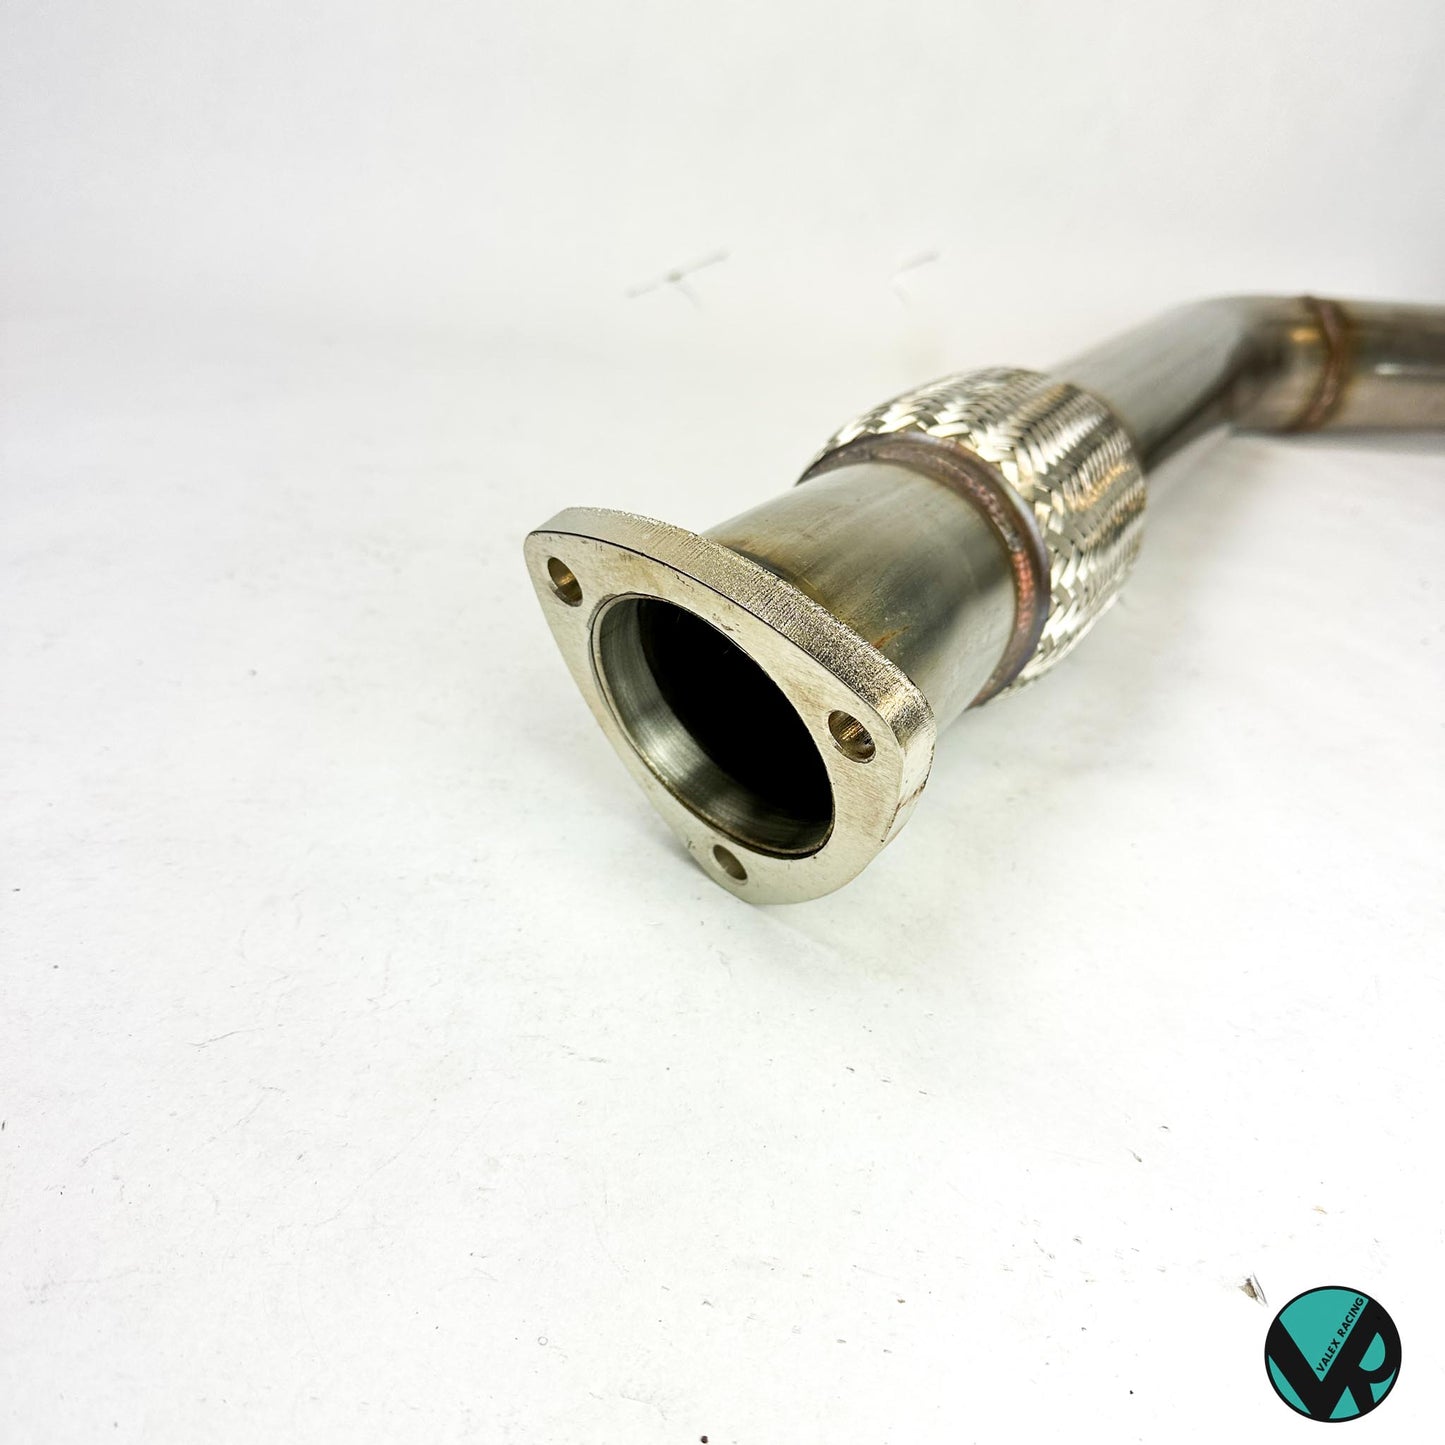 RSX K20 | PLM Power Driven T3 44mm Wastegate Sidewinder Turbo Manifold and Downpipe Combo